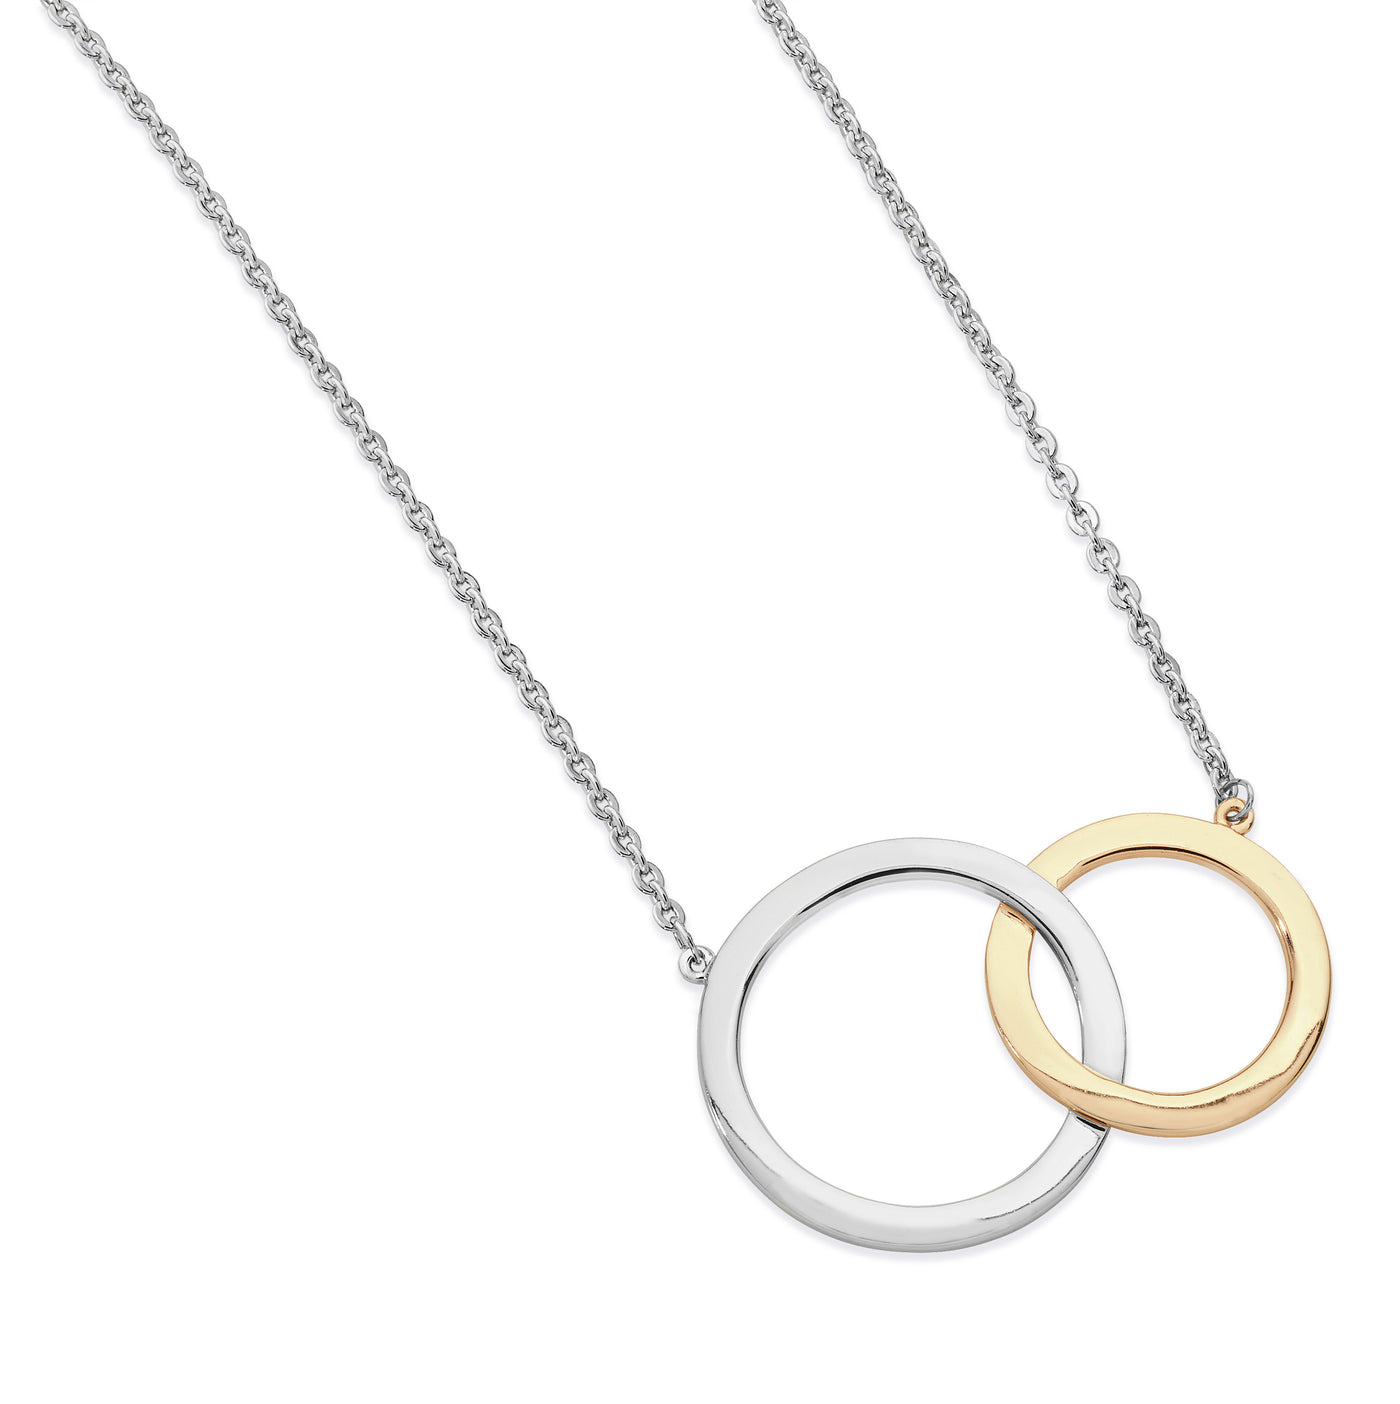 Tipperary Crystal Pendant - Infinity Collection - Interlocking Circles